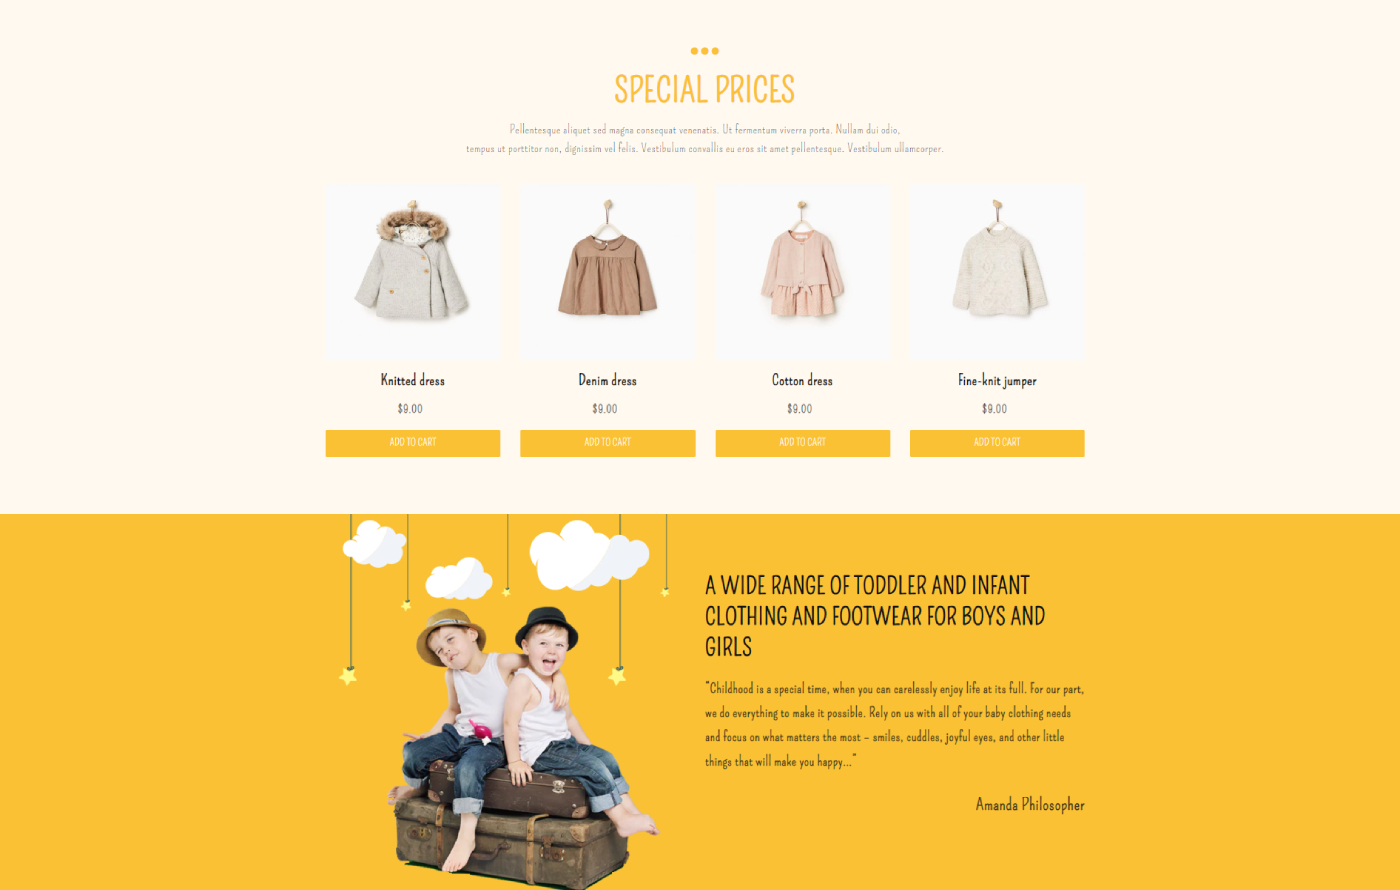 Babify - Babies Store Shopify template built by Pagefly